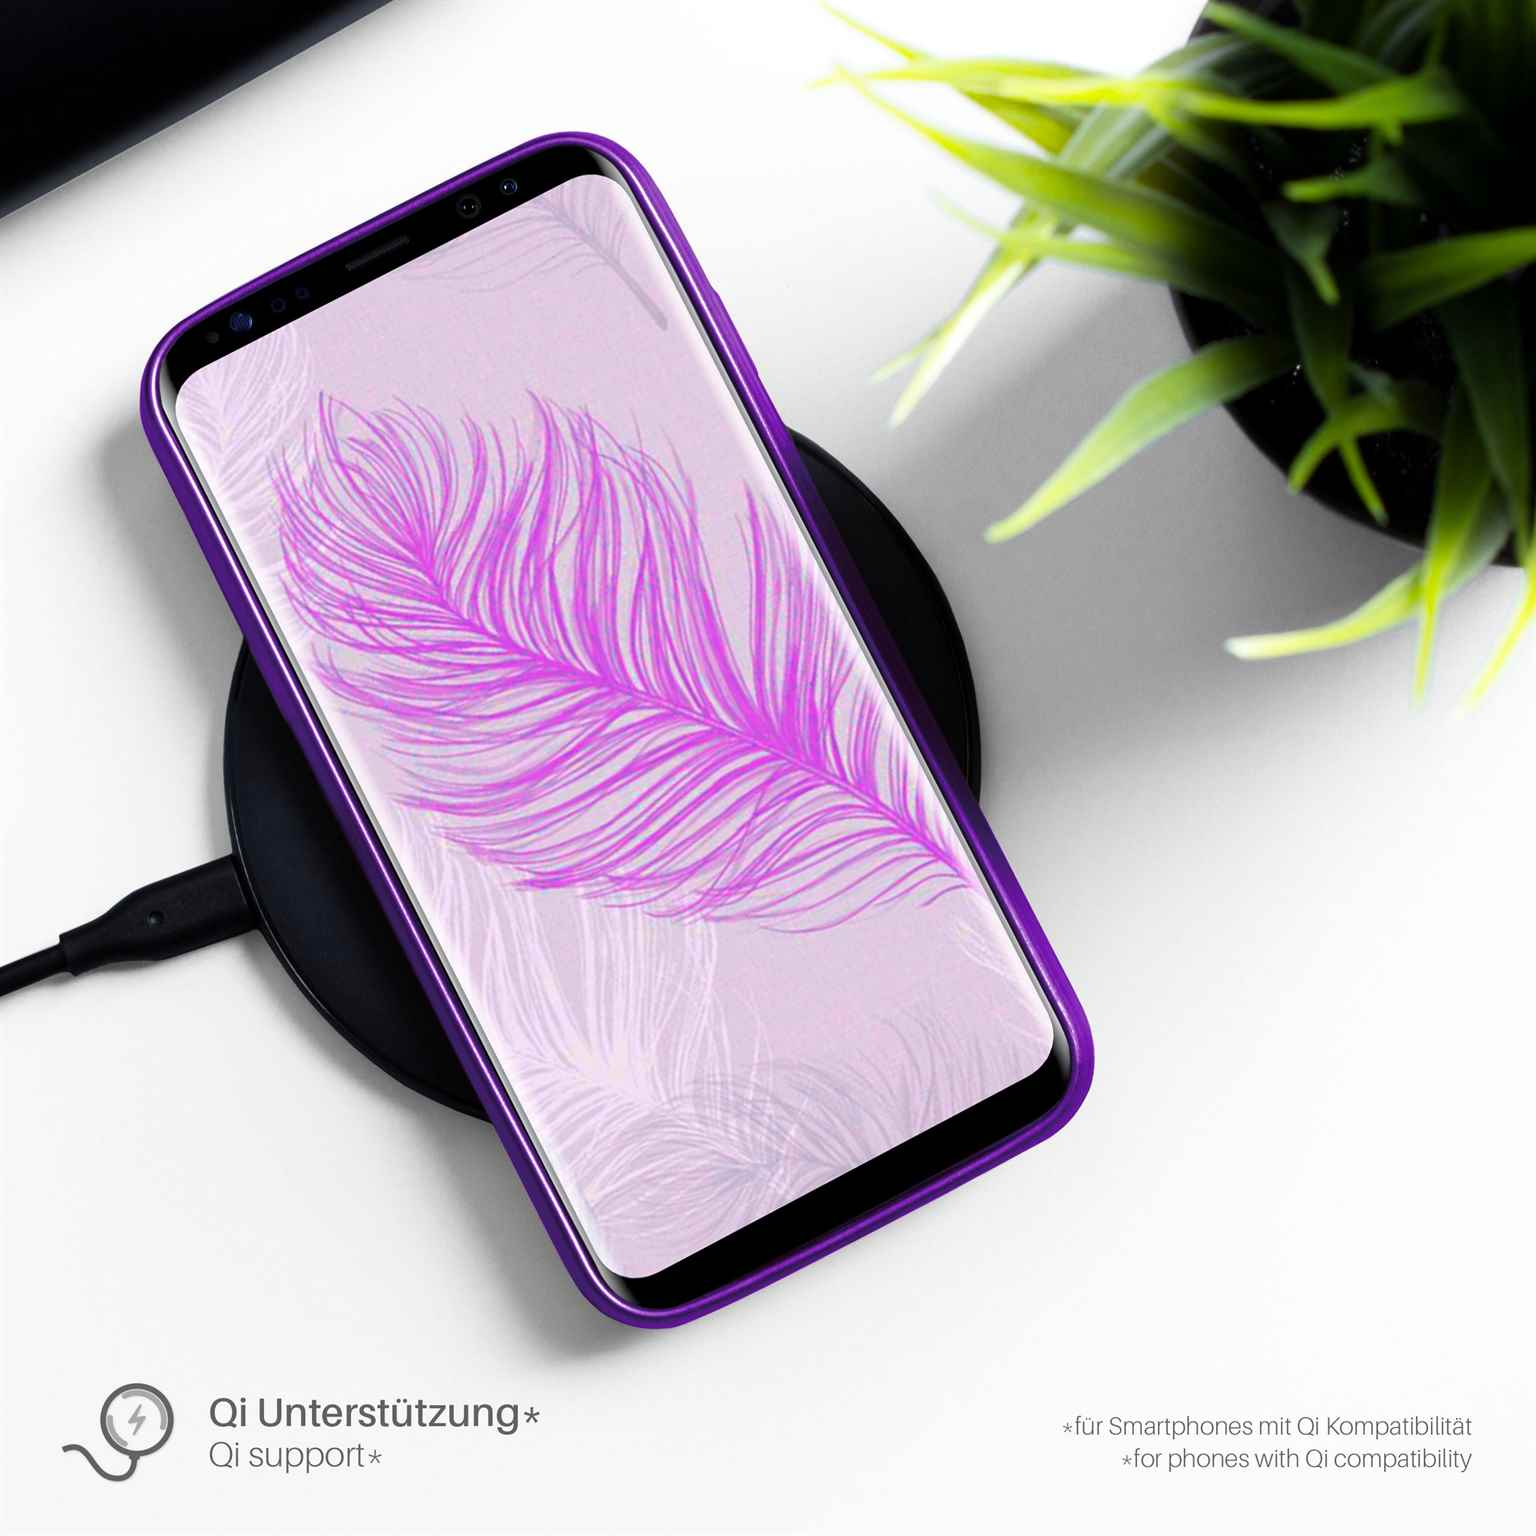 iPhone 6s, MOEX Backcover, Case, Apple, Purpure-Purple Brushed